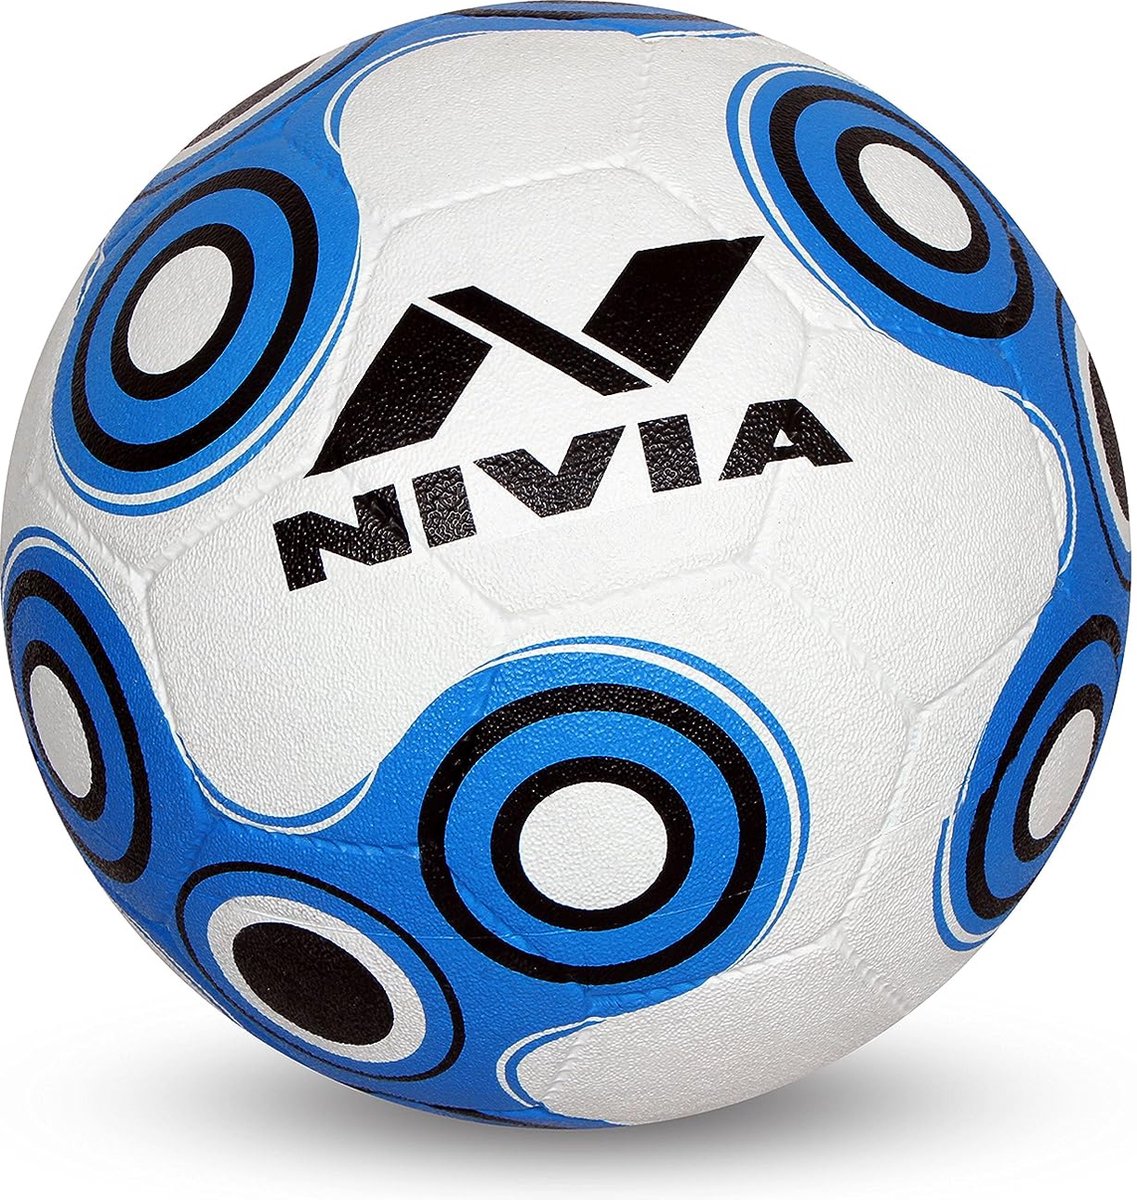 Nivia Spinner Training Football (Blue/White, Size 5) | Material: PVC | Soccer Ball | Youth & Adult | Waterproof | Ideal for Training